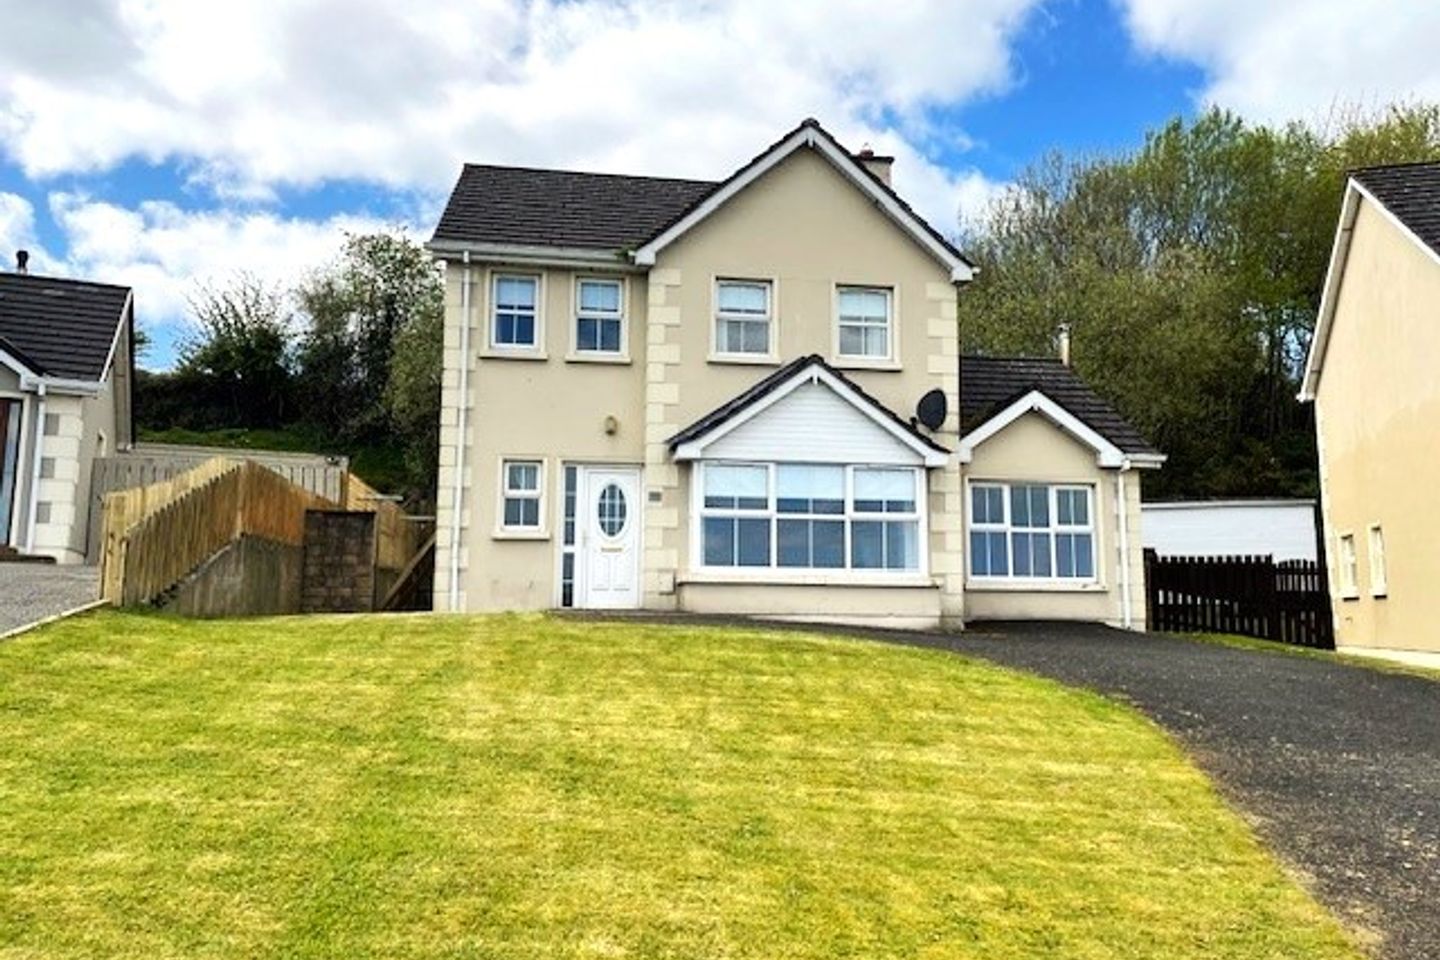 53 Saint Jude's Court, Lifford, Co. Donegal, F93VWT3